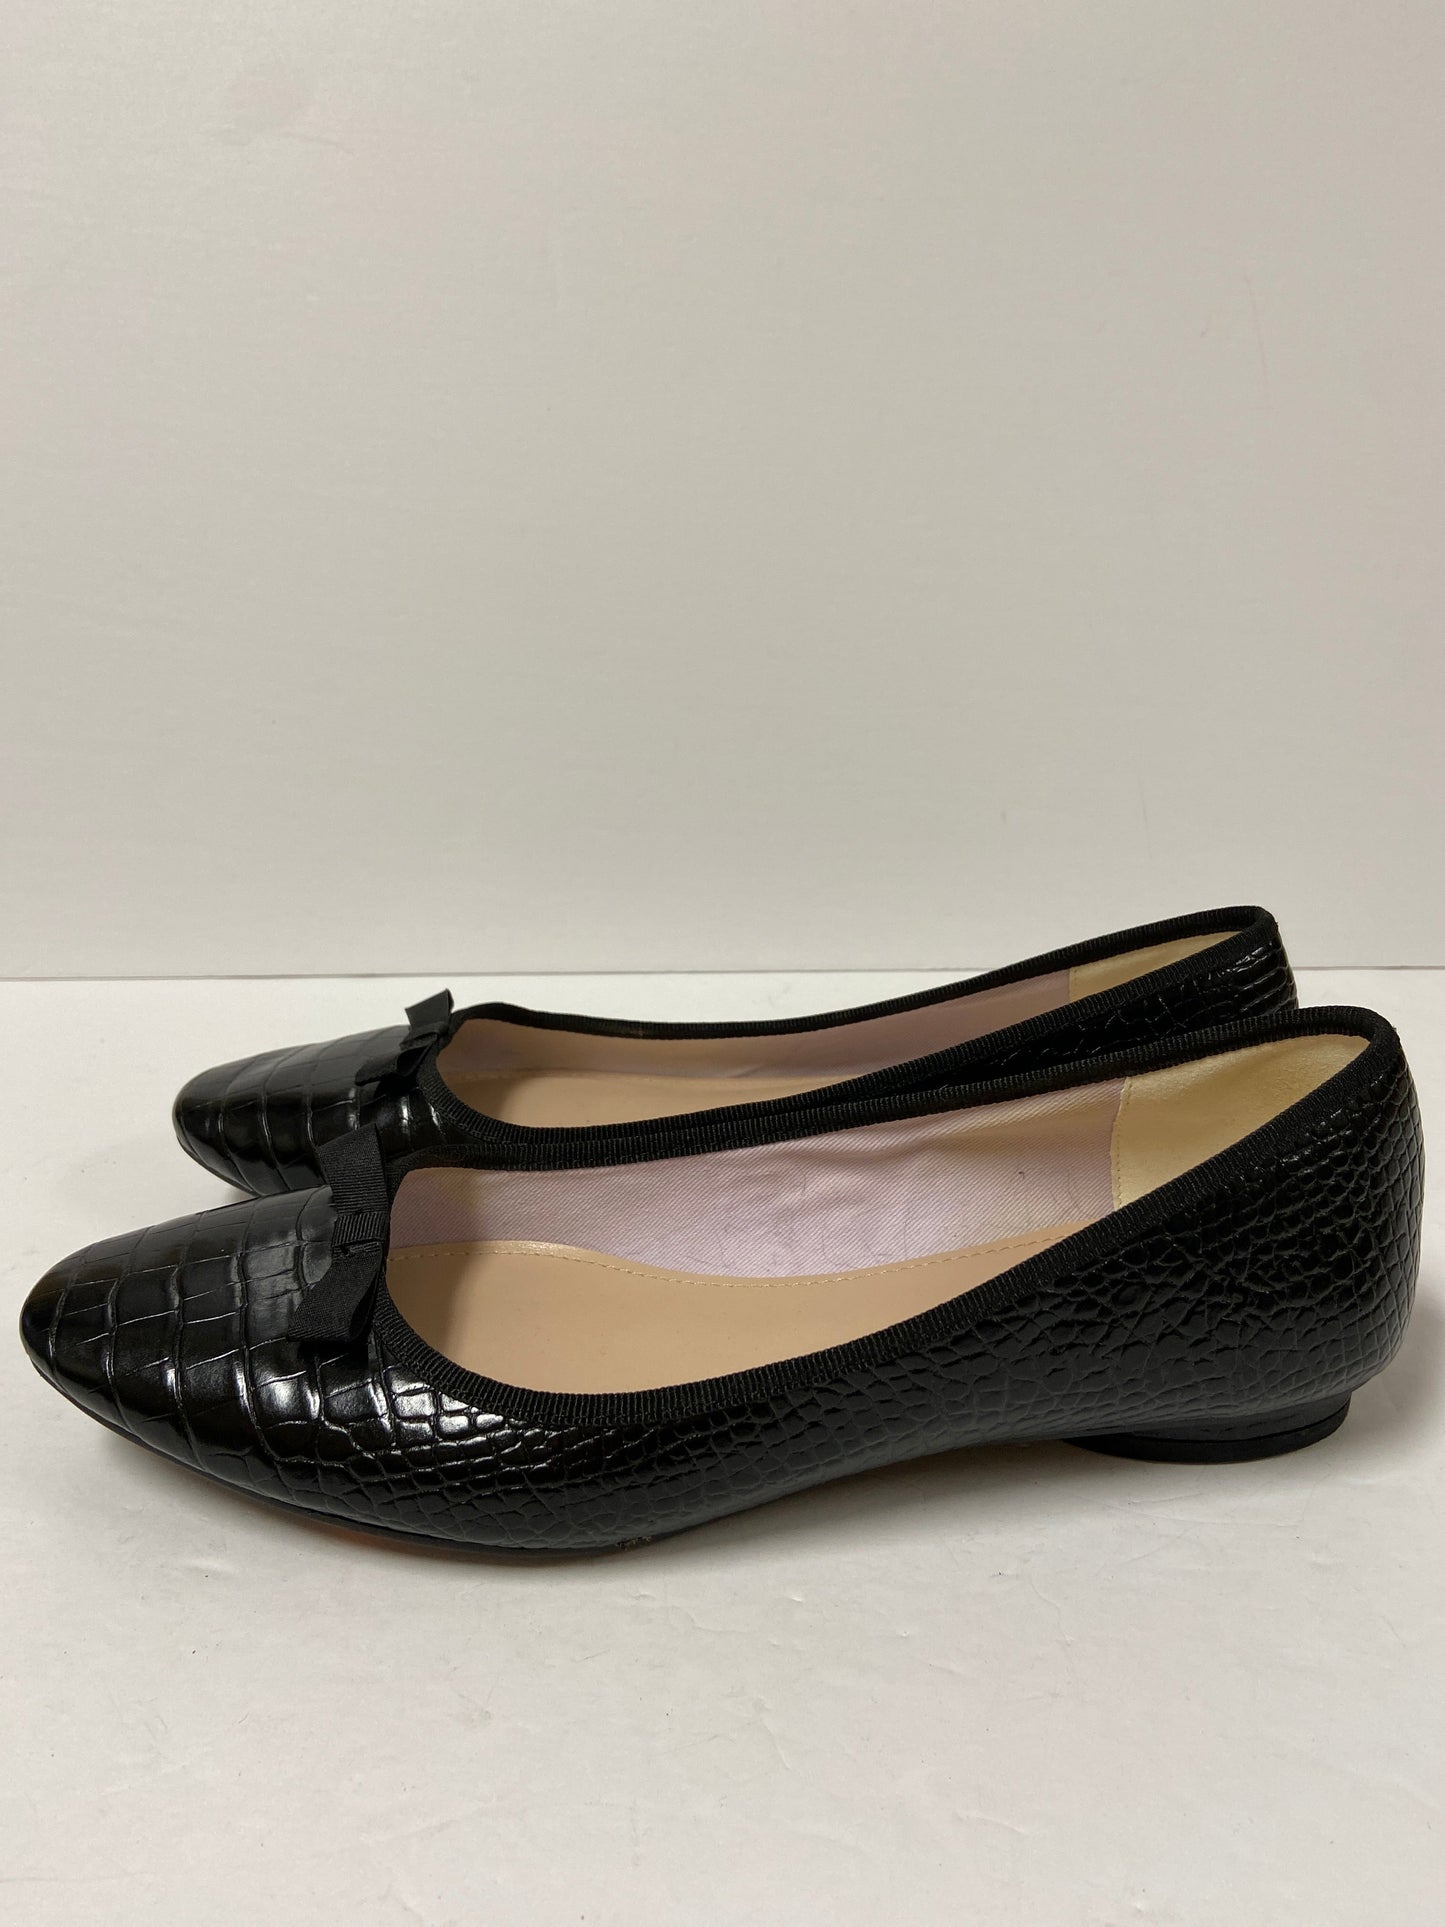 Shoes Flats Ballet By Clothes Mentor  Size: 10